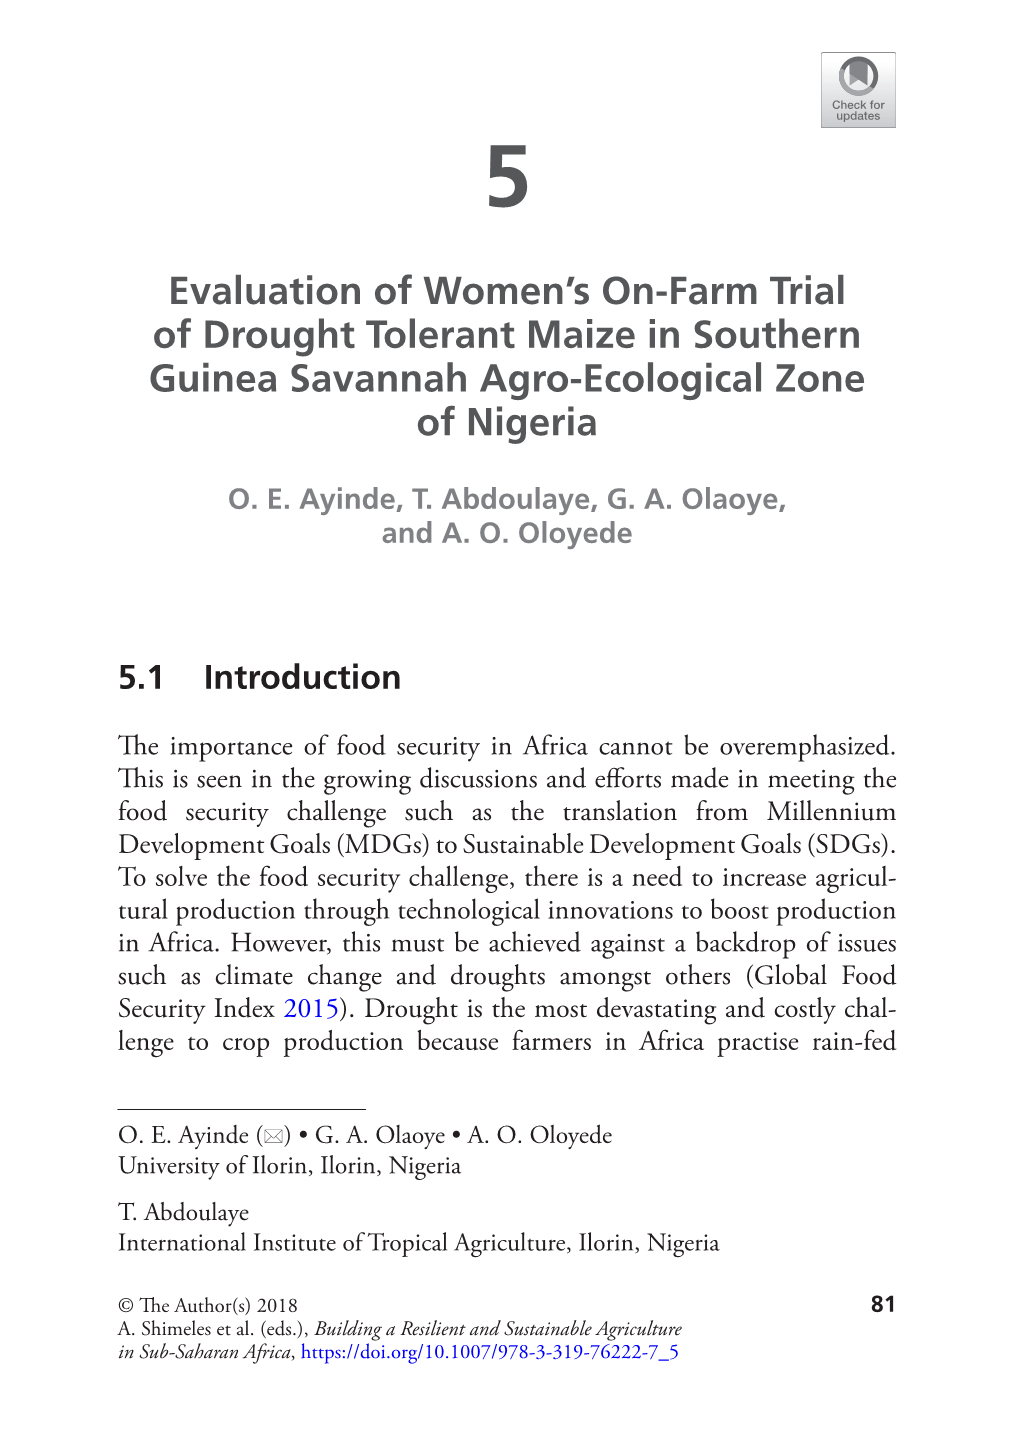 Evaluation of Women's On-Farm Trial of Drought Tolerant Maize In